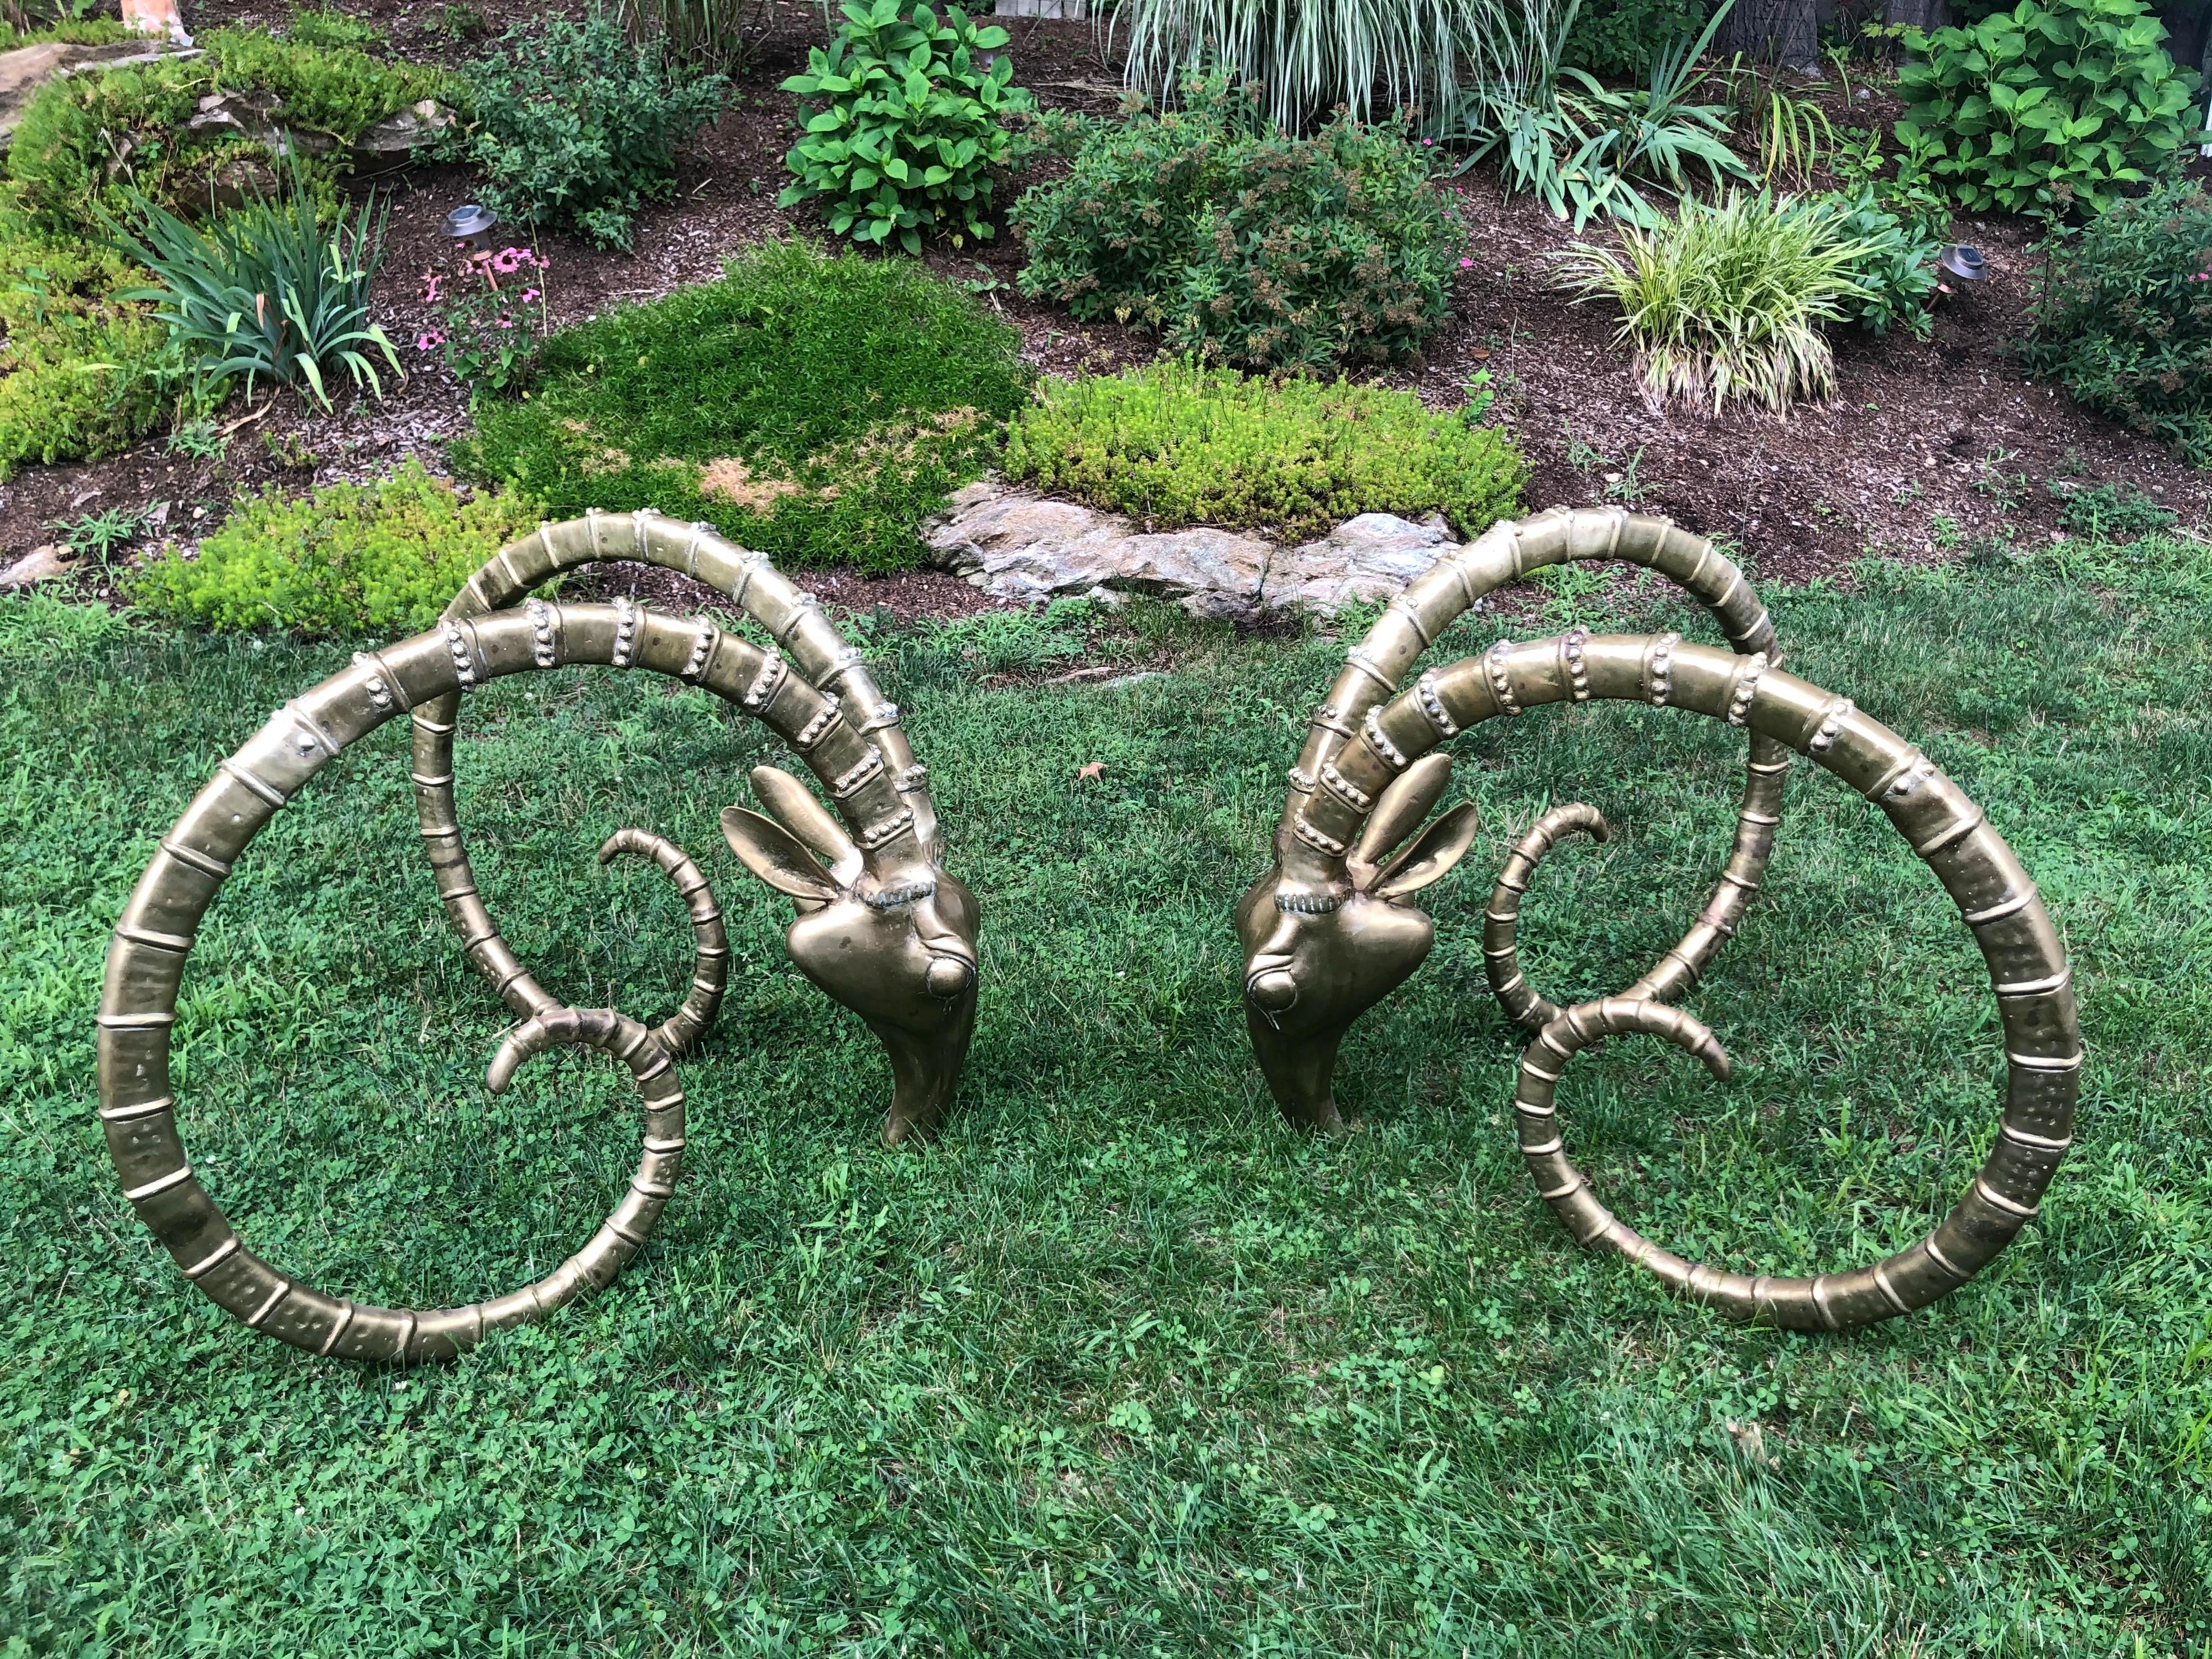 Pair of solid brass ibex Ram head dining table bases in the style of Alain Chervet. Intricately detailed these designer pieces make quite a statement. Just needs a glass top to your specs to be complete. These can also make an amazing desk. Price is